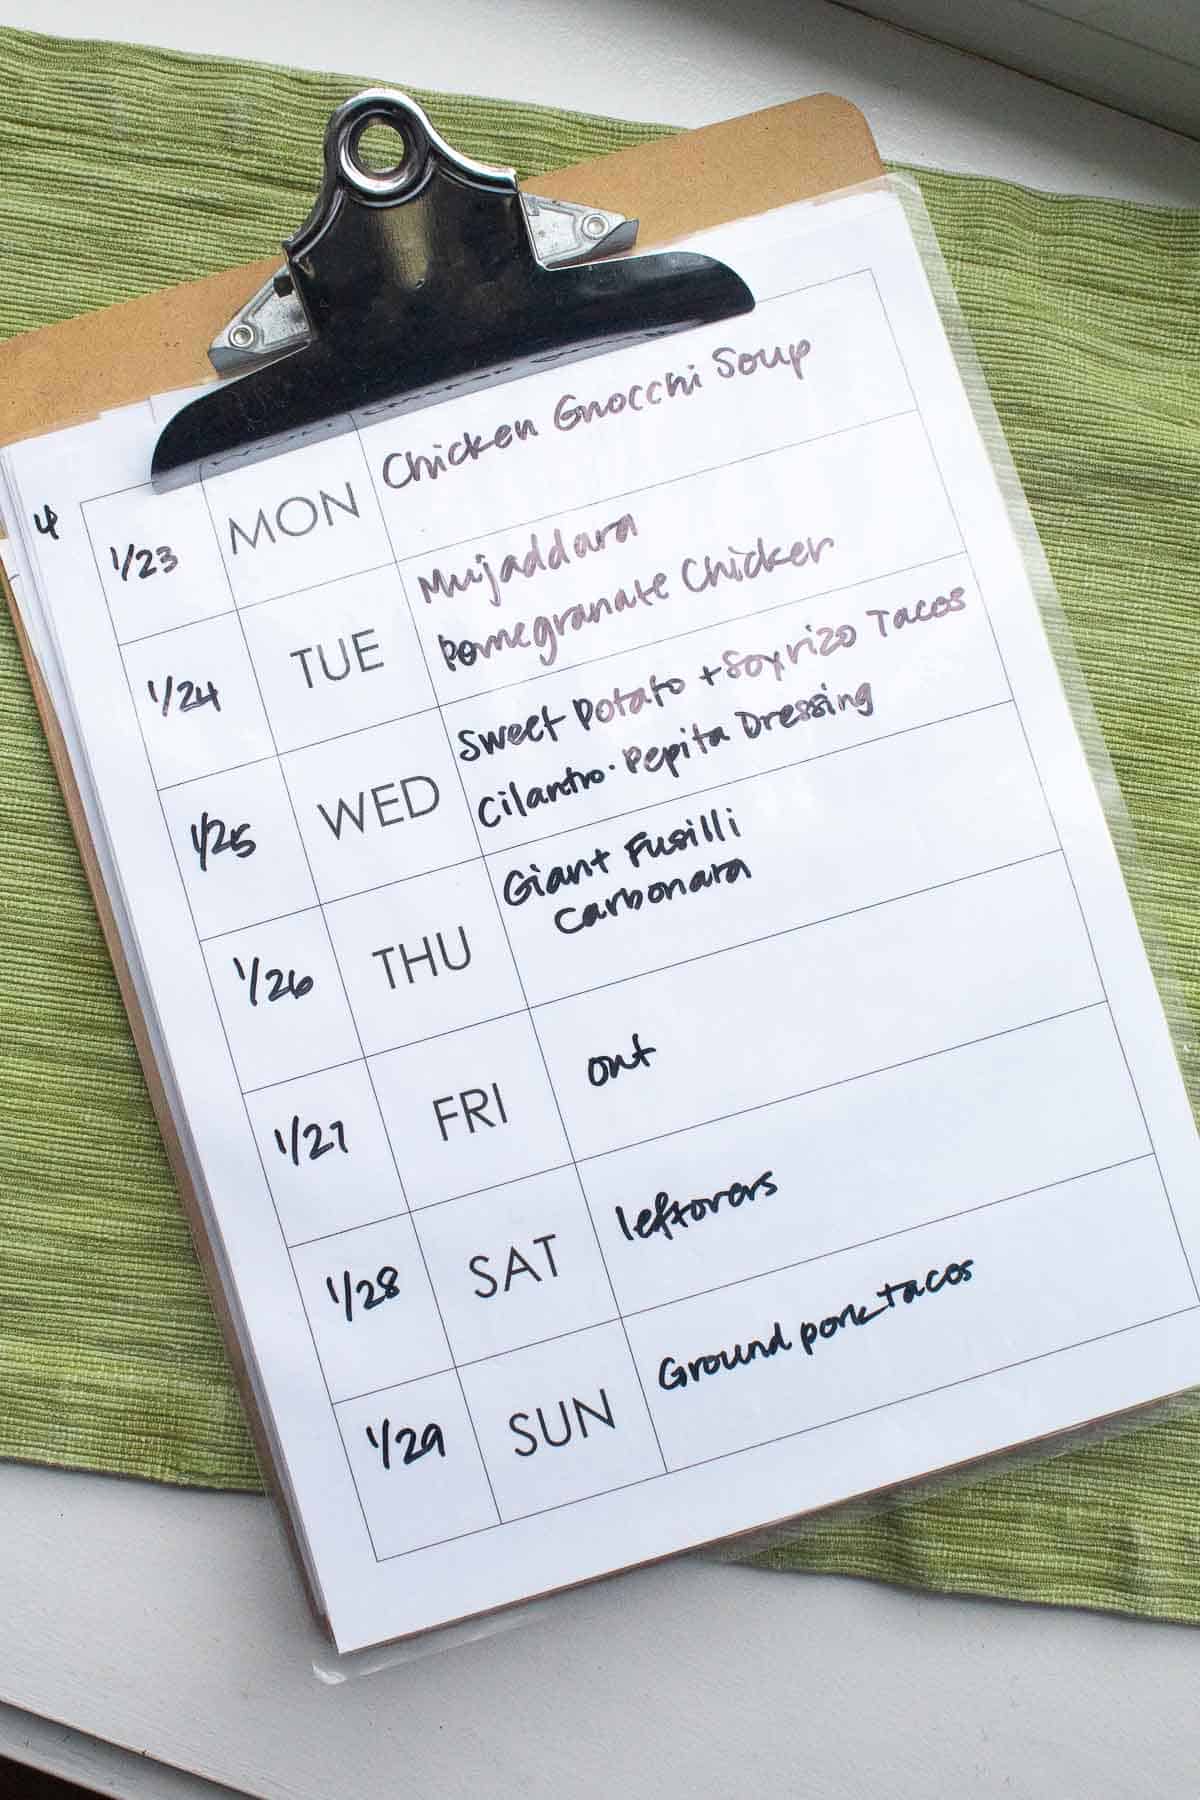 The weekly meal plan written out on a laminated sheet attached to a clip board.